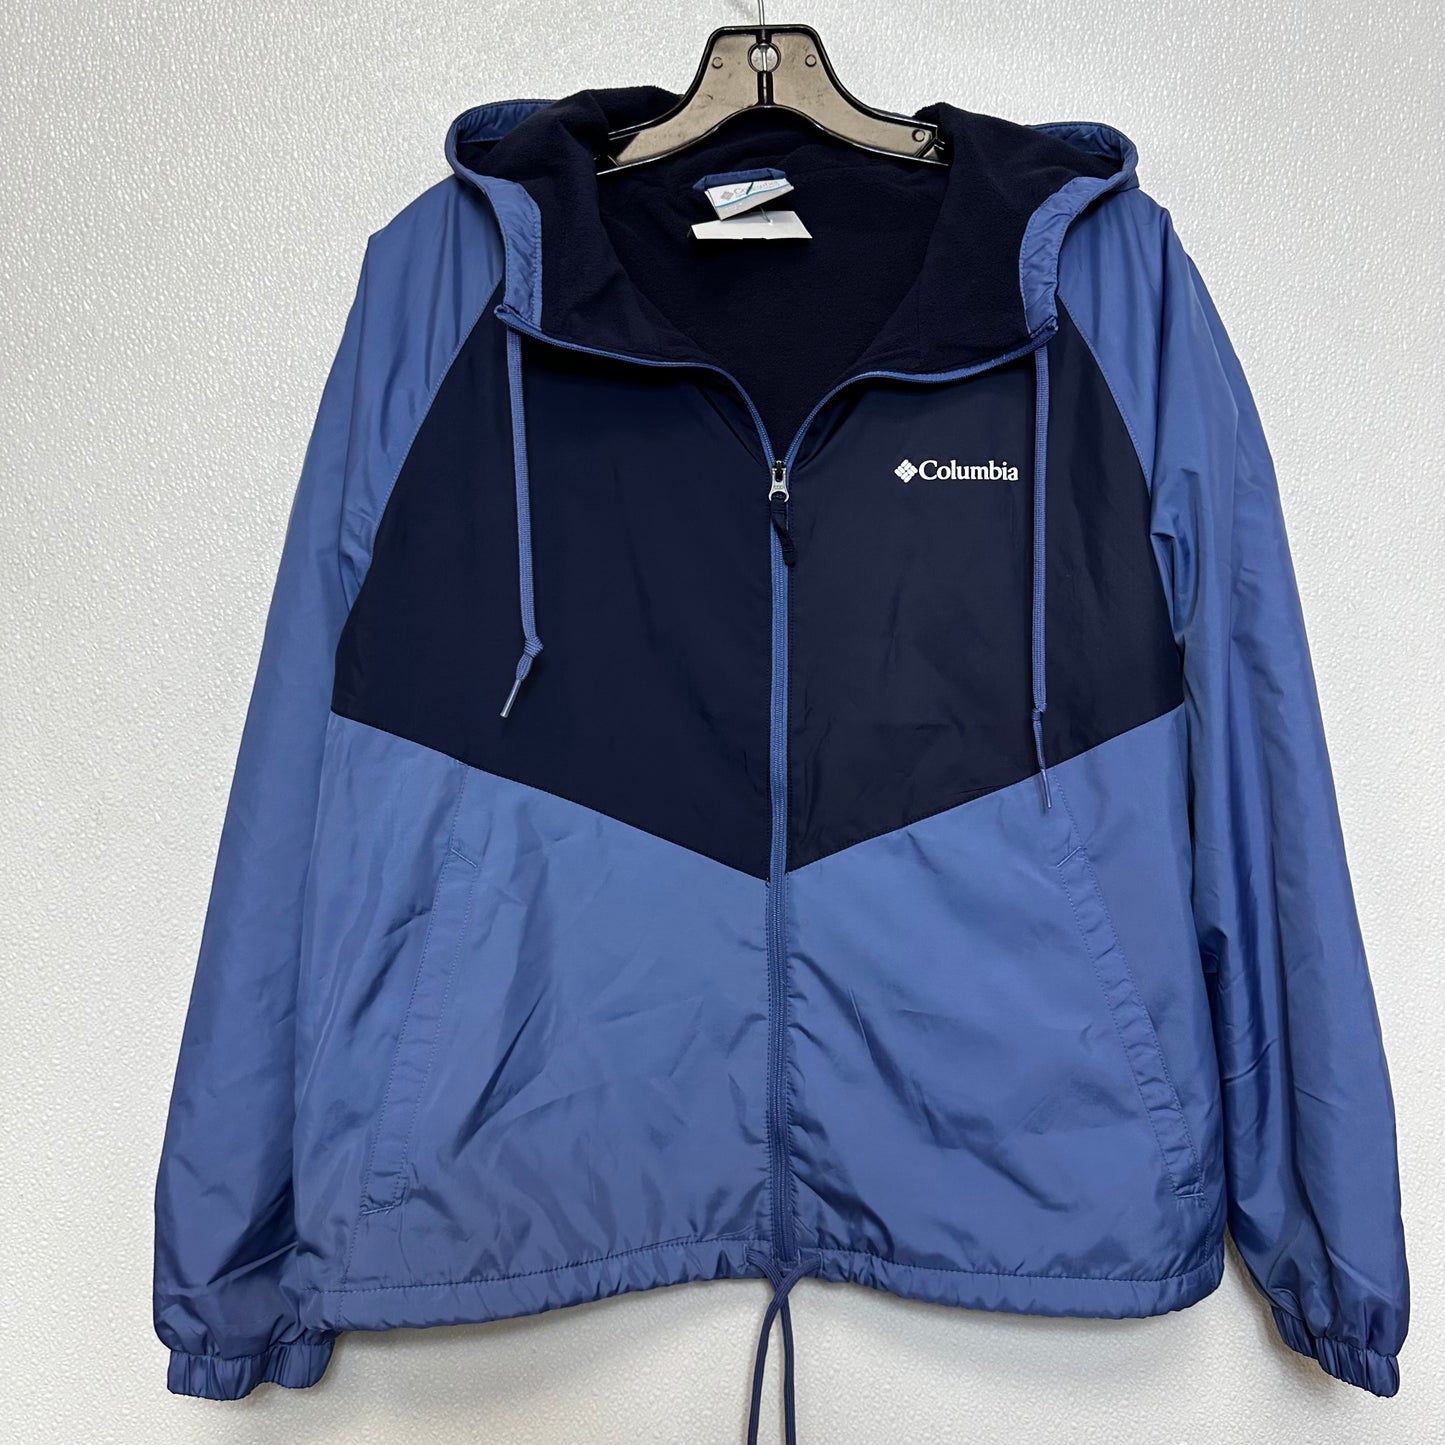 Blue Jacket Other Columbia, Size S